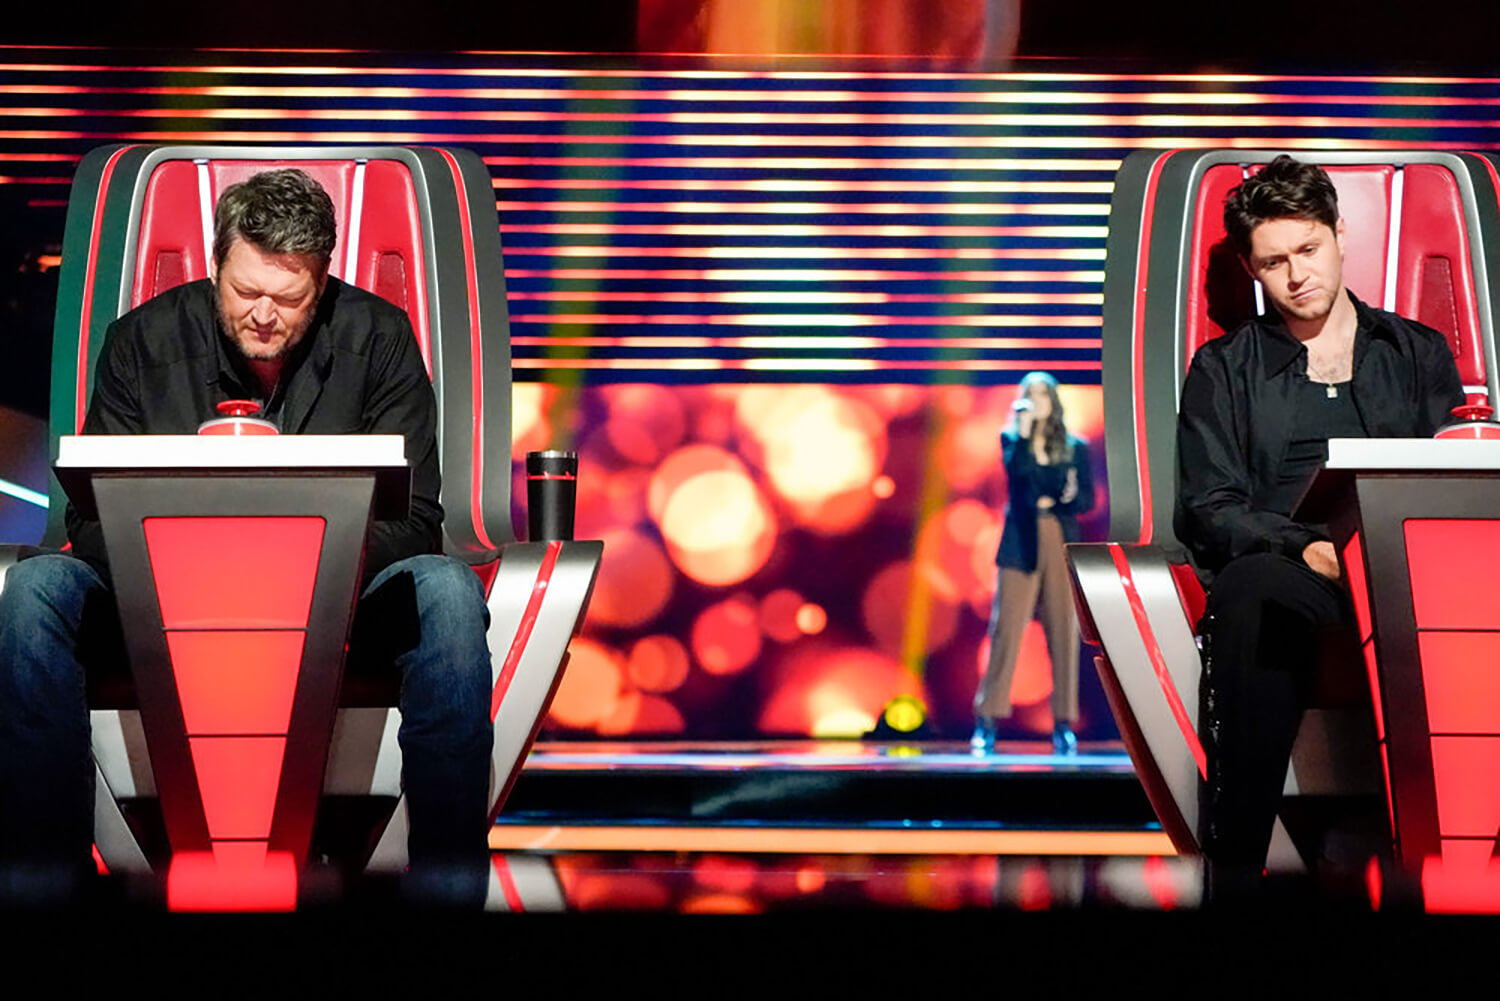 Blake Shelton and NIall Horan concentrate as they listen to a contestant's audition on The Voice Season 23.